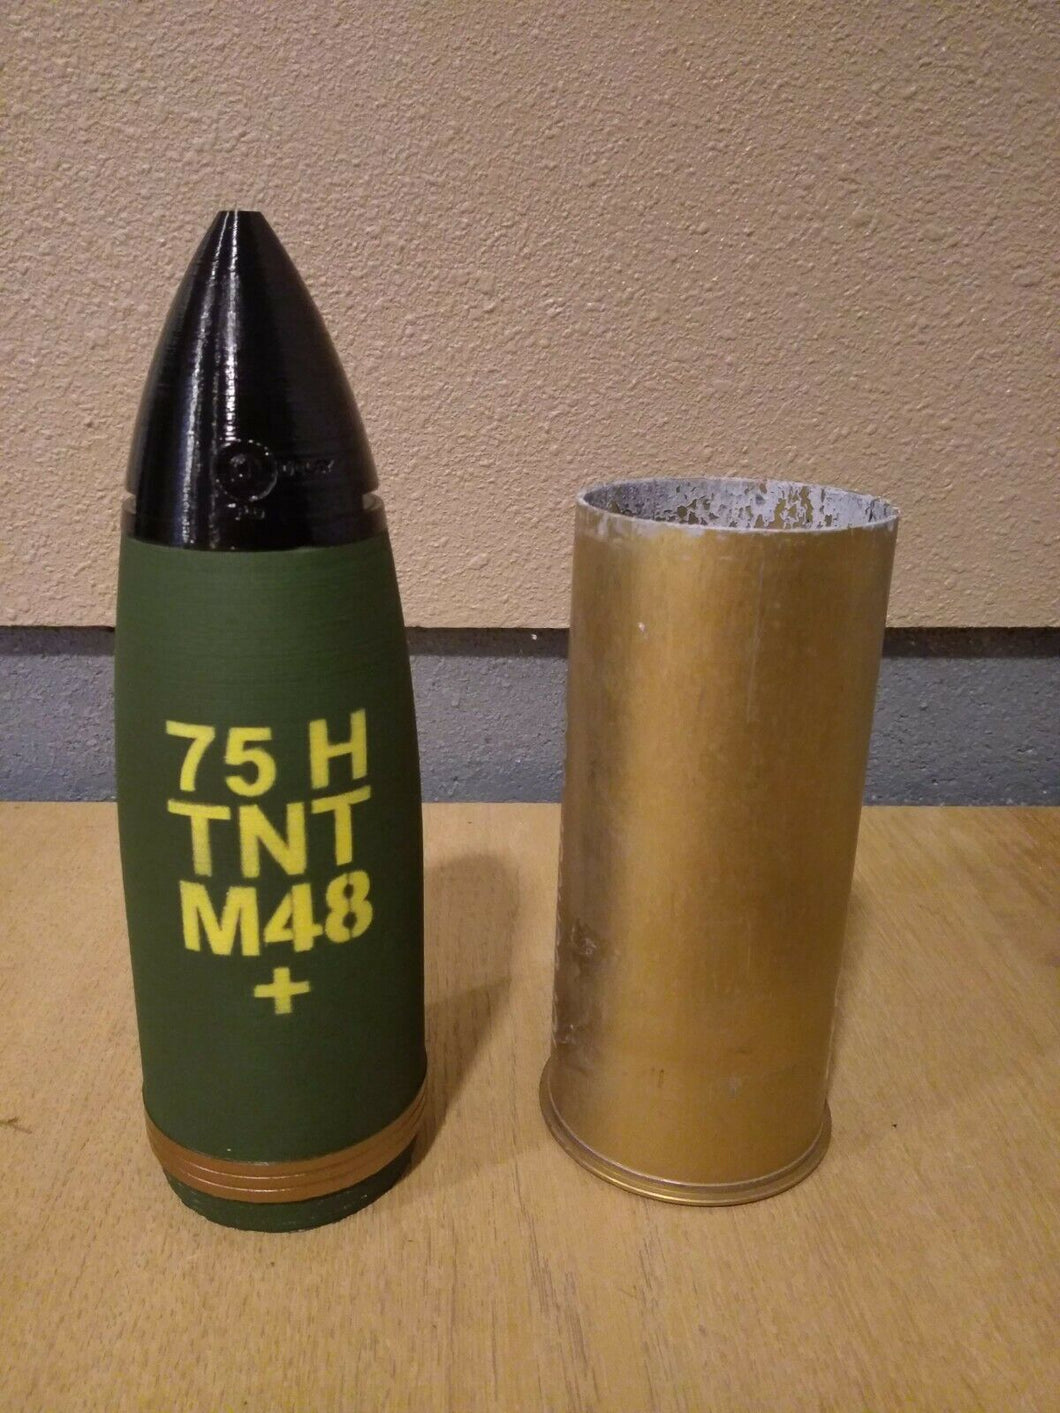 3D Printed 75mm Pack Howitzer Shell - Piggy Bank for Salute Casing